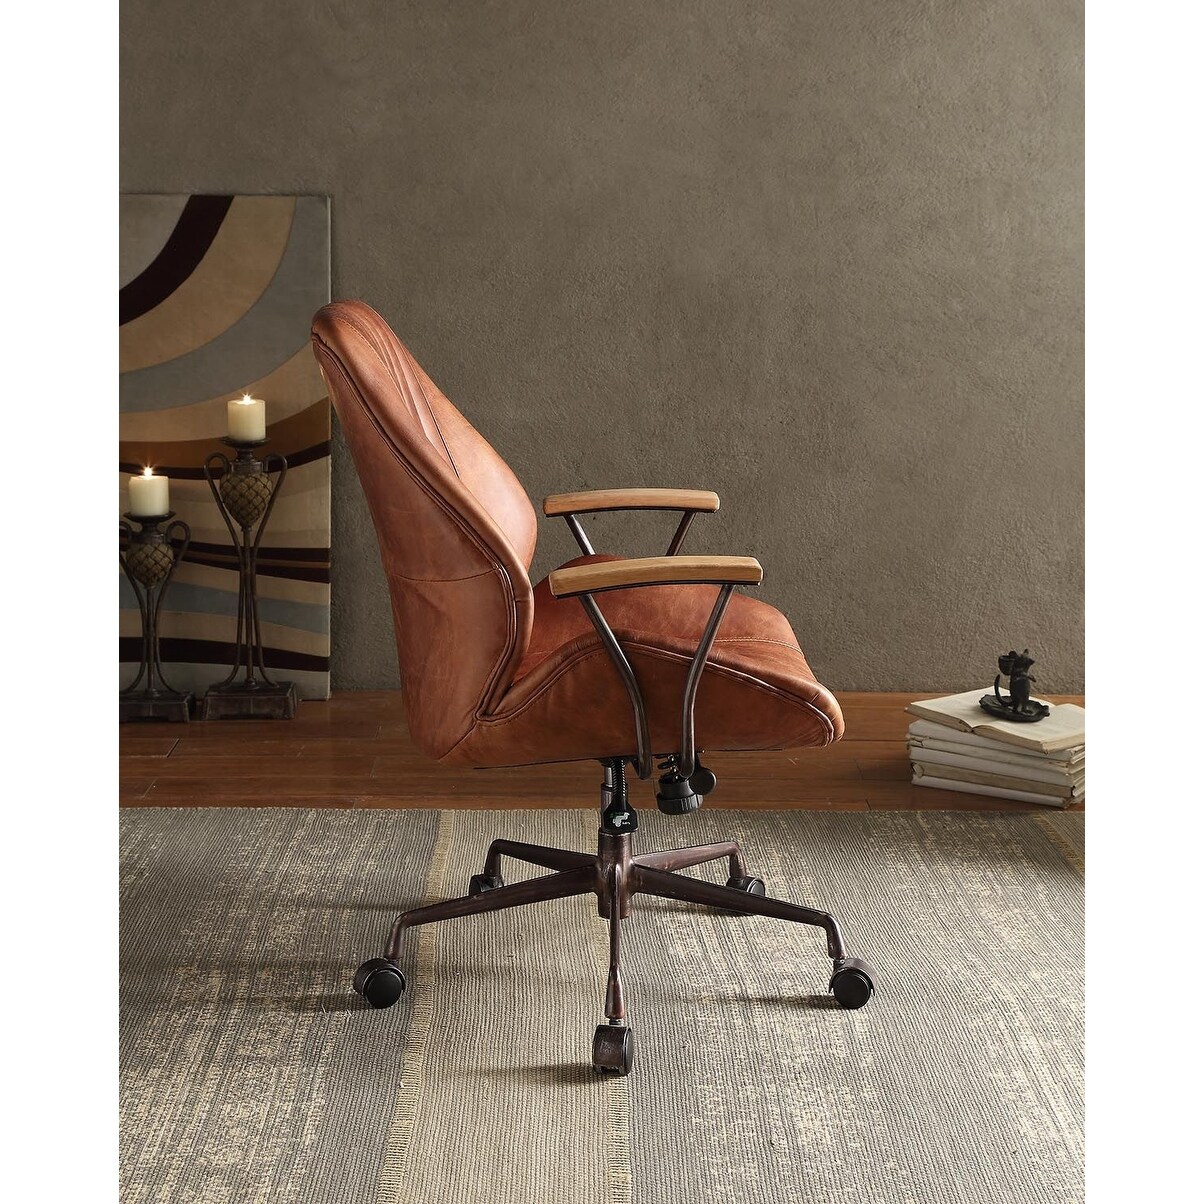 Industrial Swivel Office Chair in Leather with Adjustable Height